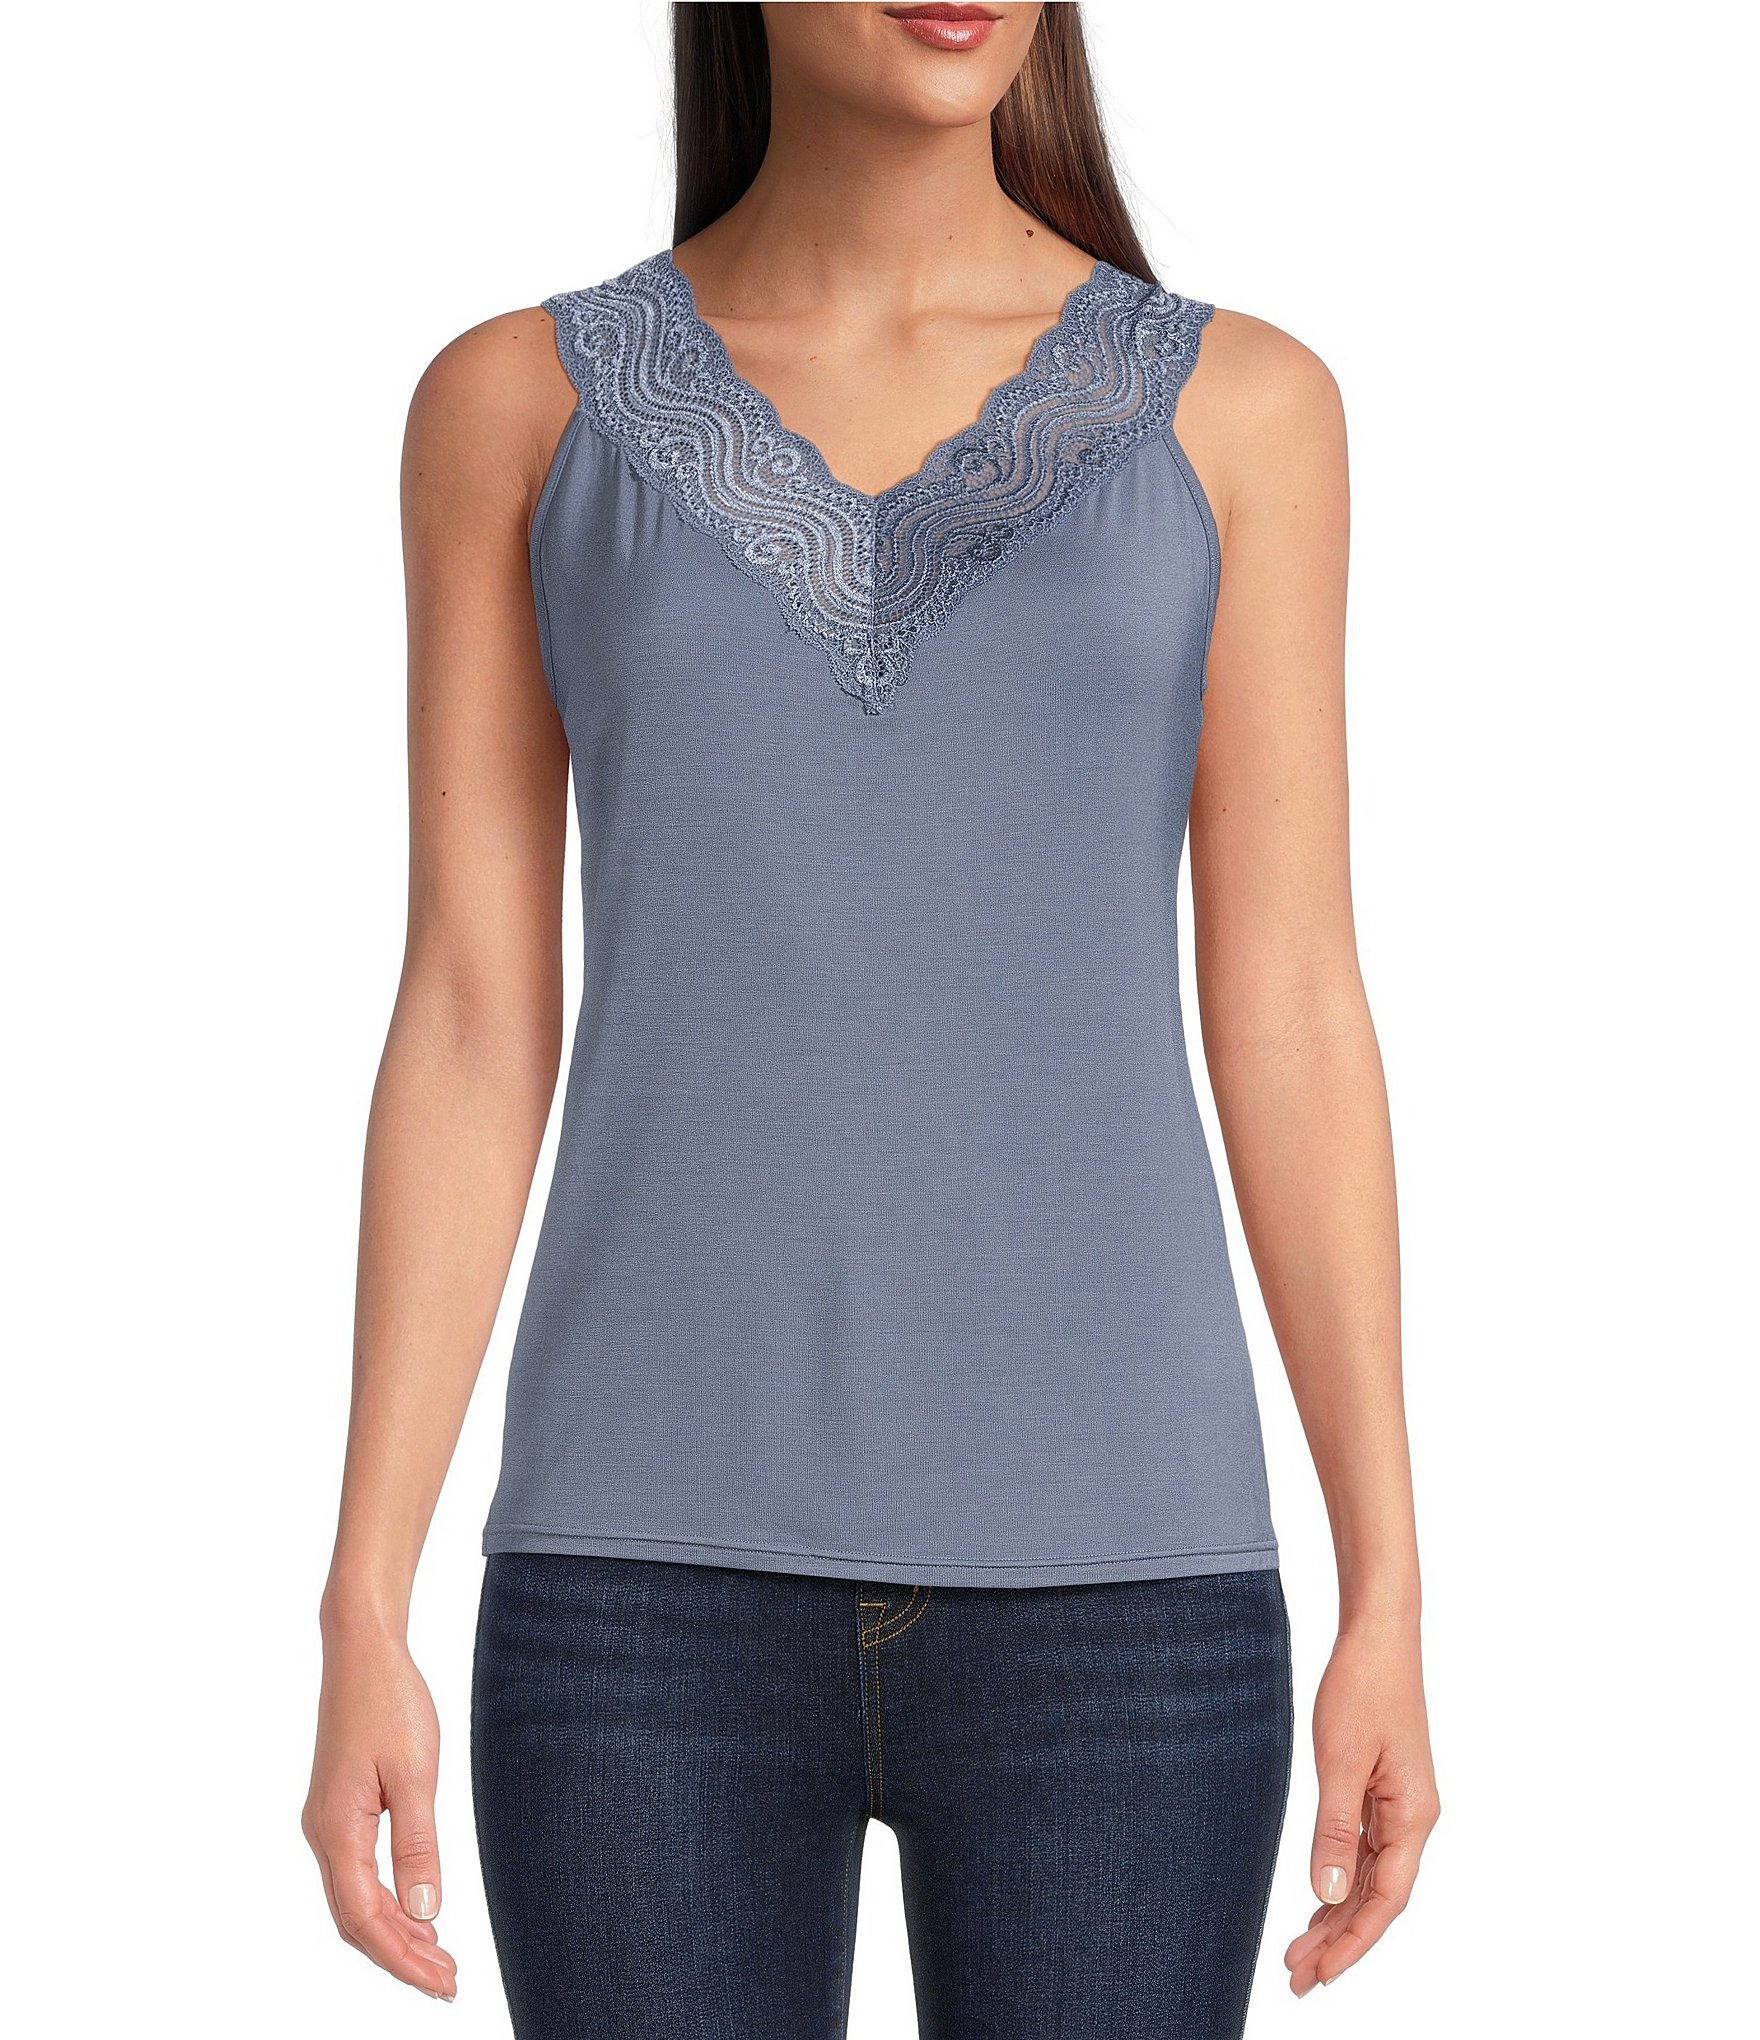 Lace Trim Thermal Camisole Top